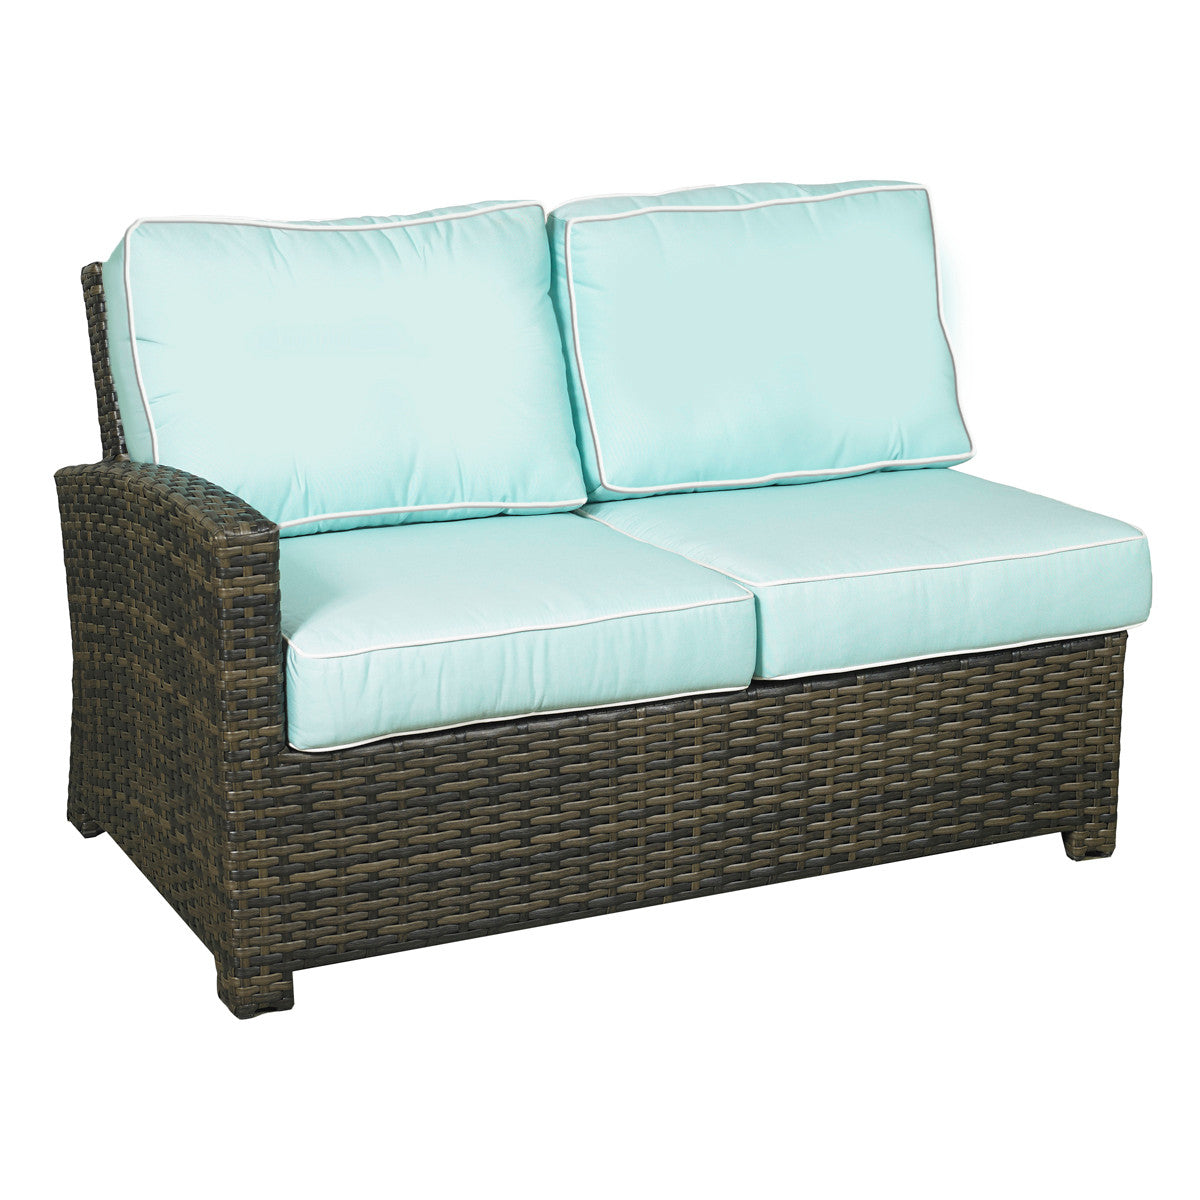 Forever Patio Brookside Wicker 6 Piece Sectional Set